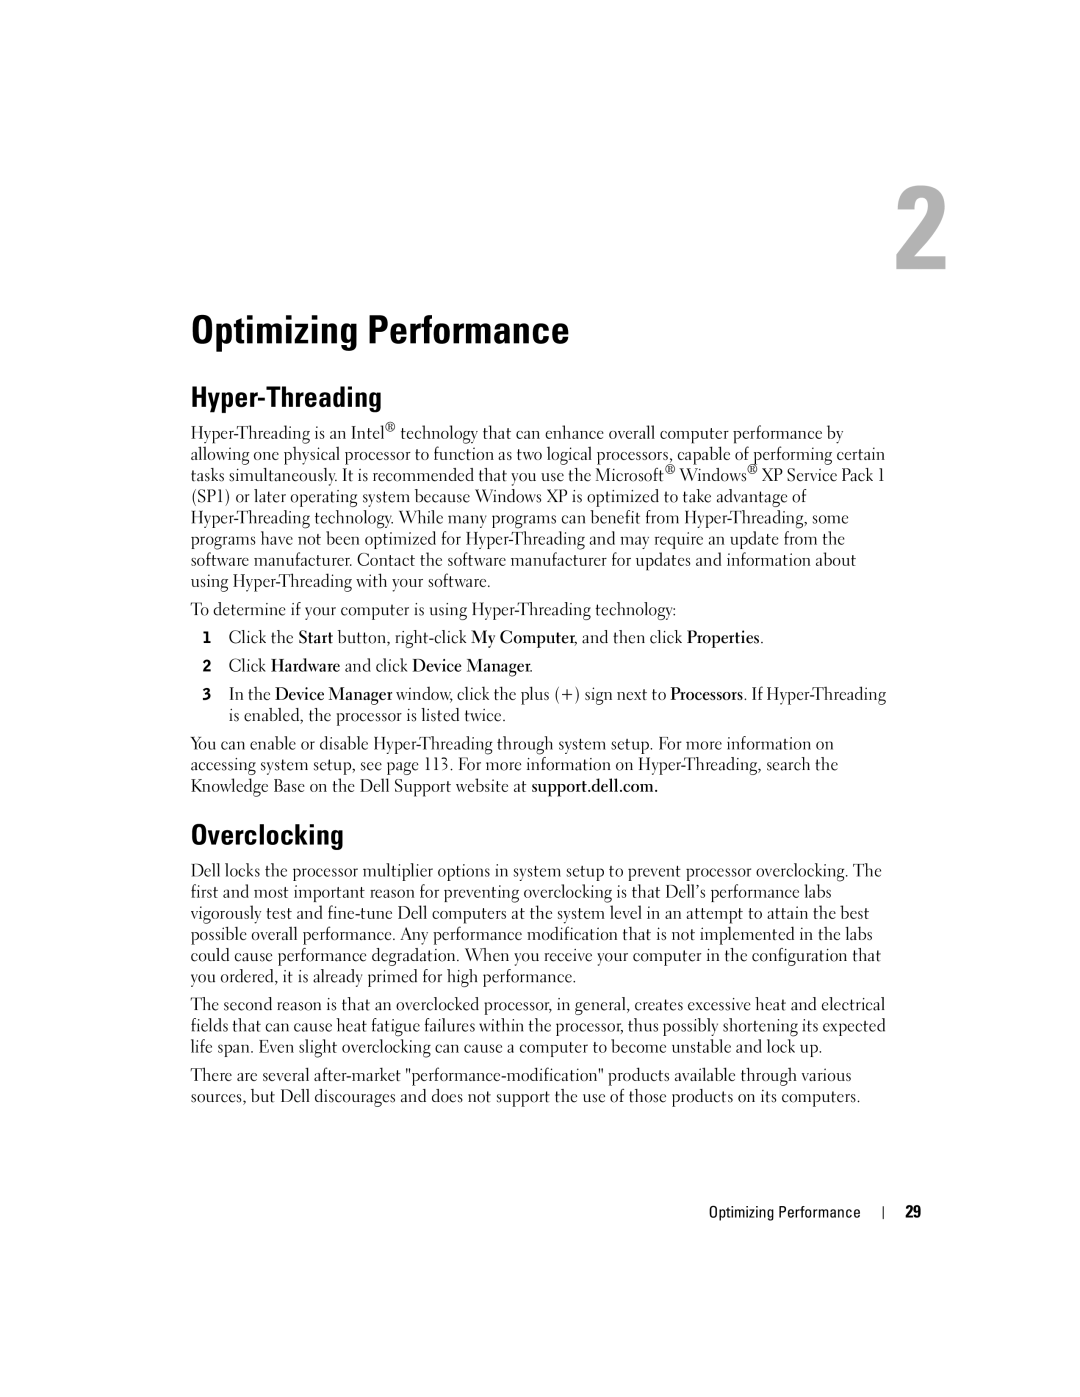 Dell XPS GEN 3 manual Hyper-Threading, Overclocking, Click Hardware and click Device Manager, Optimizing Performance 